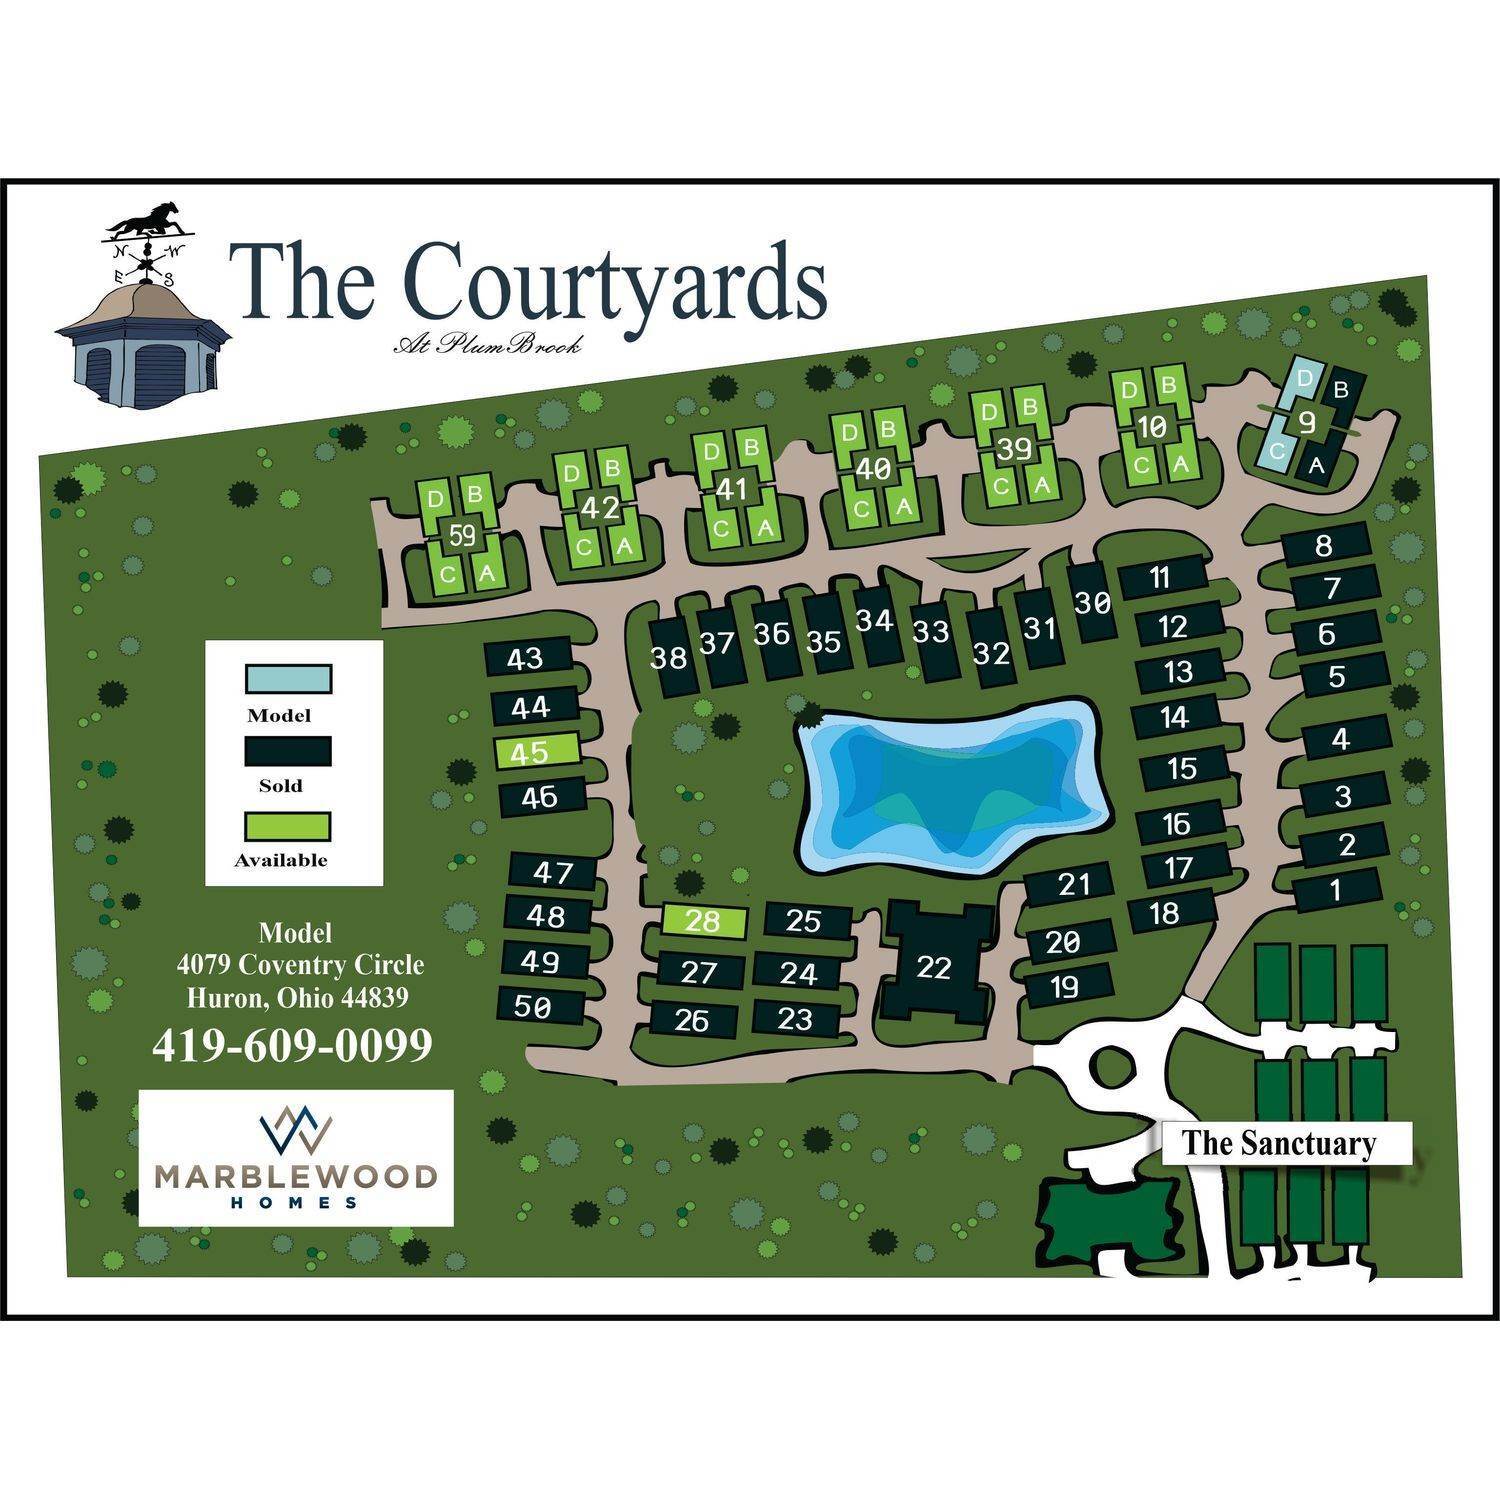 16. 4079 Coventry Circle, Huron, OH 44839에 The Courtyards at Plum Brook 건물